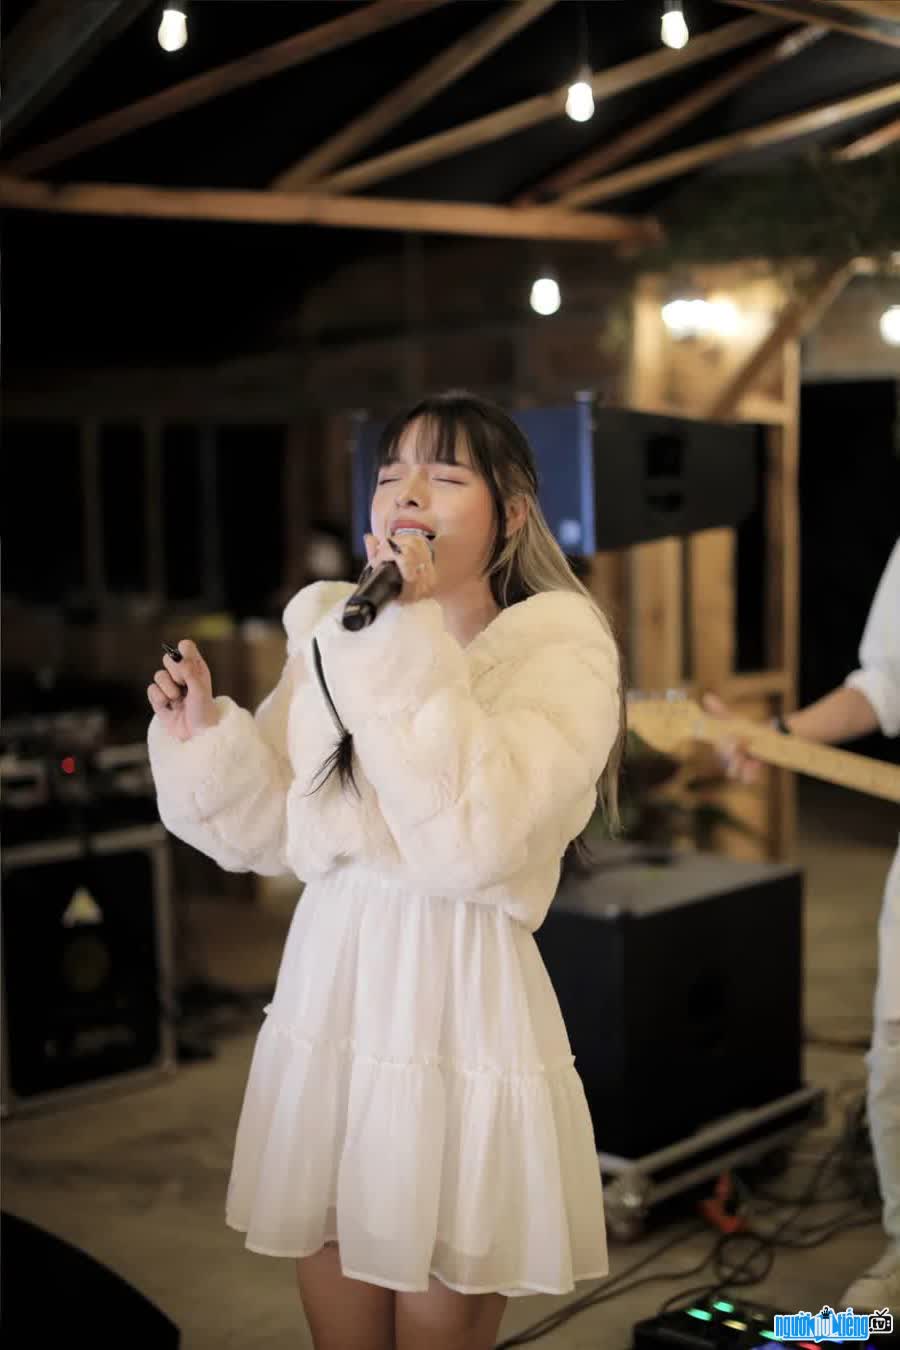 TikToker Thao Bunny is known for her singing videos in elevators